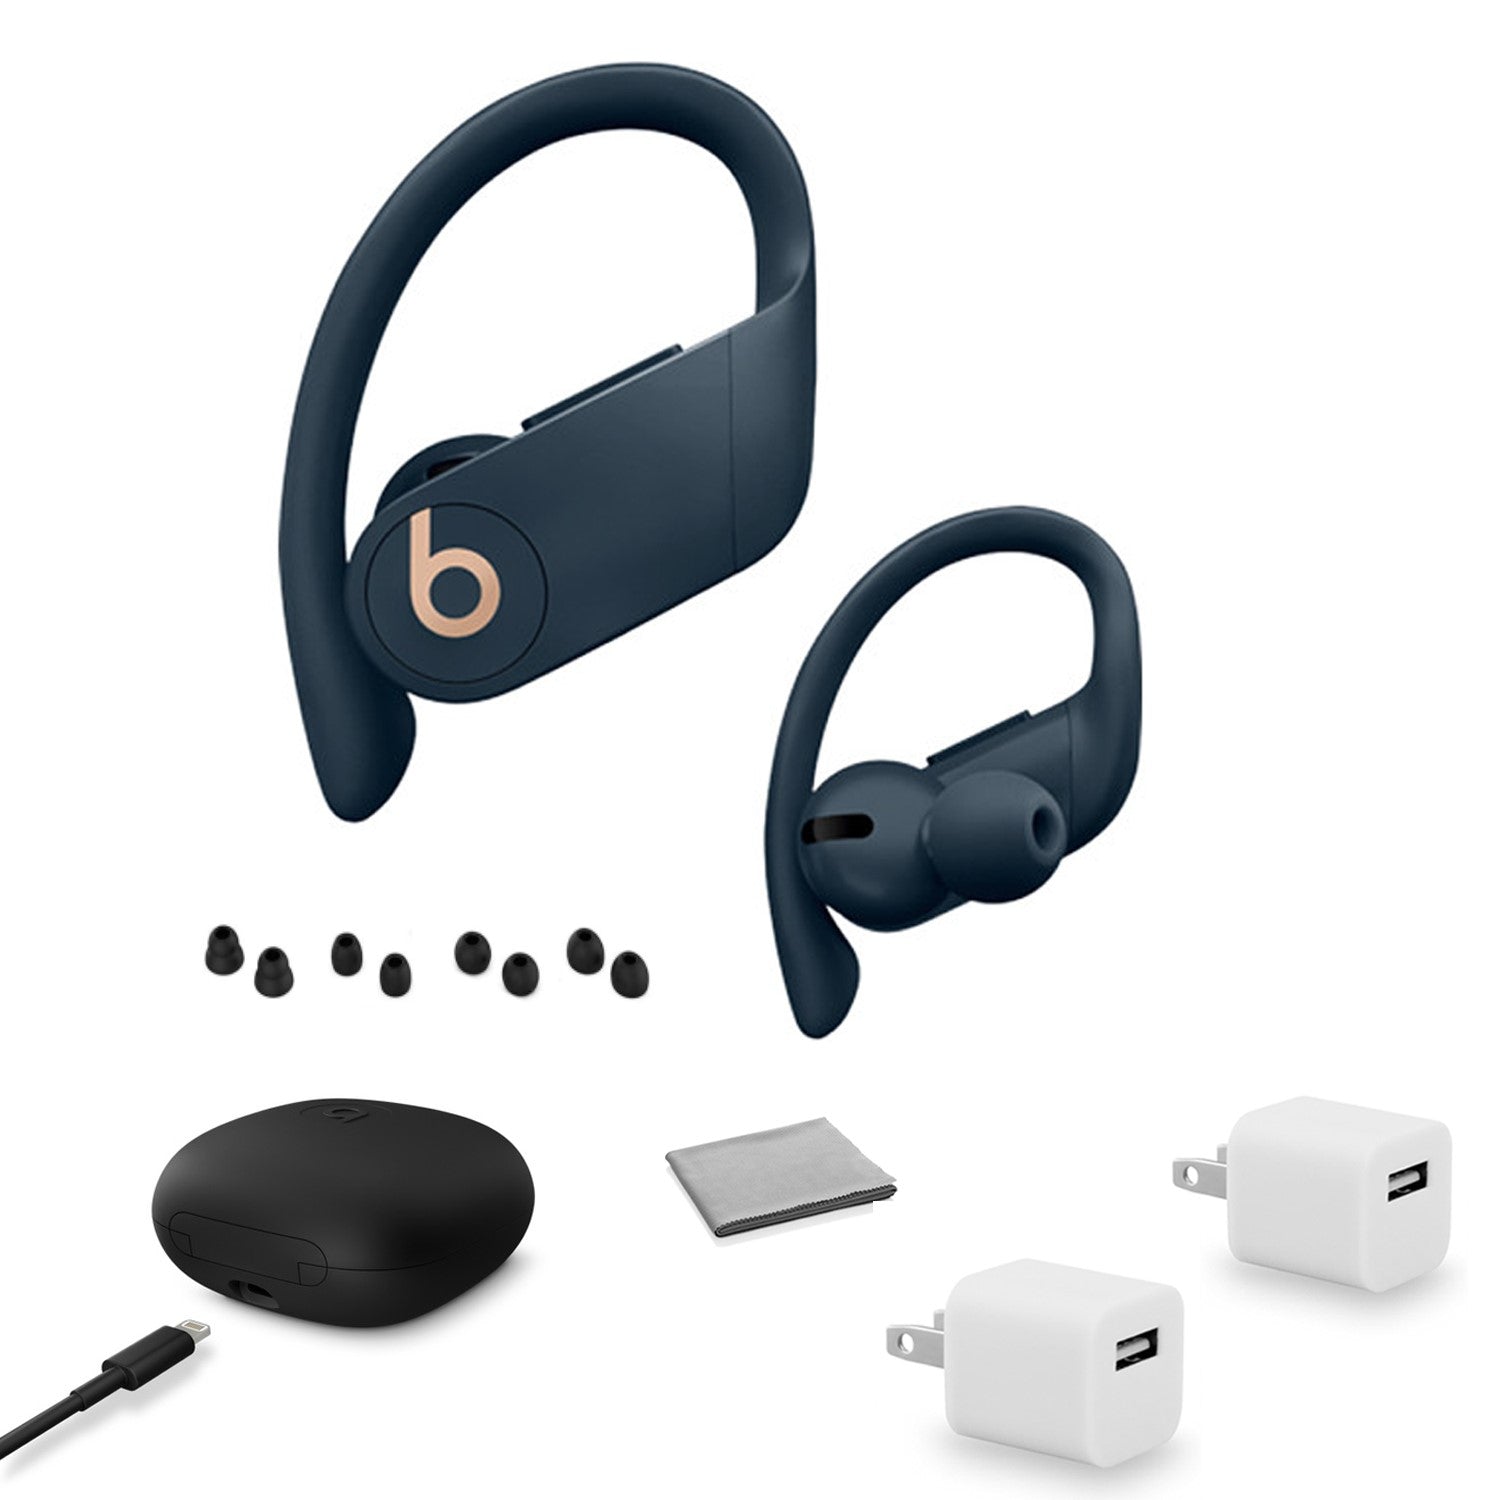 Beats by Dr. Dre Powerbeats Pro In-Ear Wireless Headphones (Navy Blue) MY592LL/A with 2x USB Wall Adapter Cubes + More